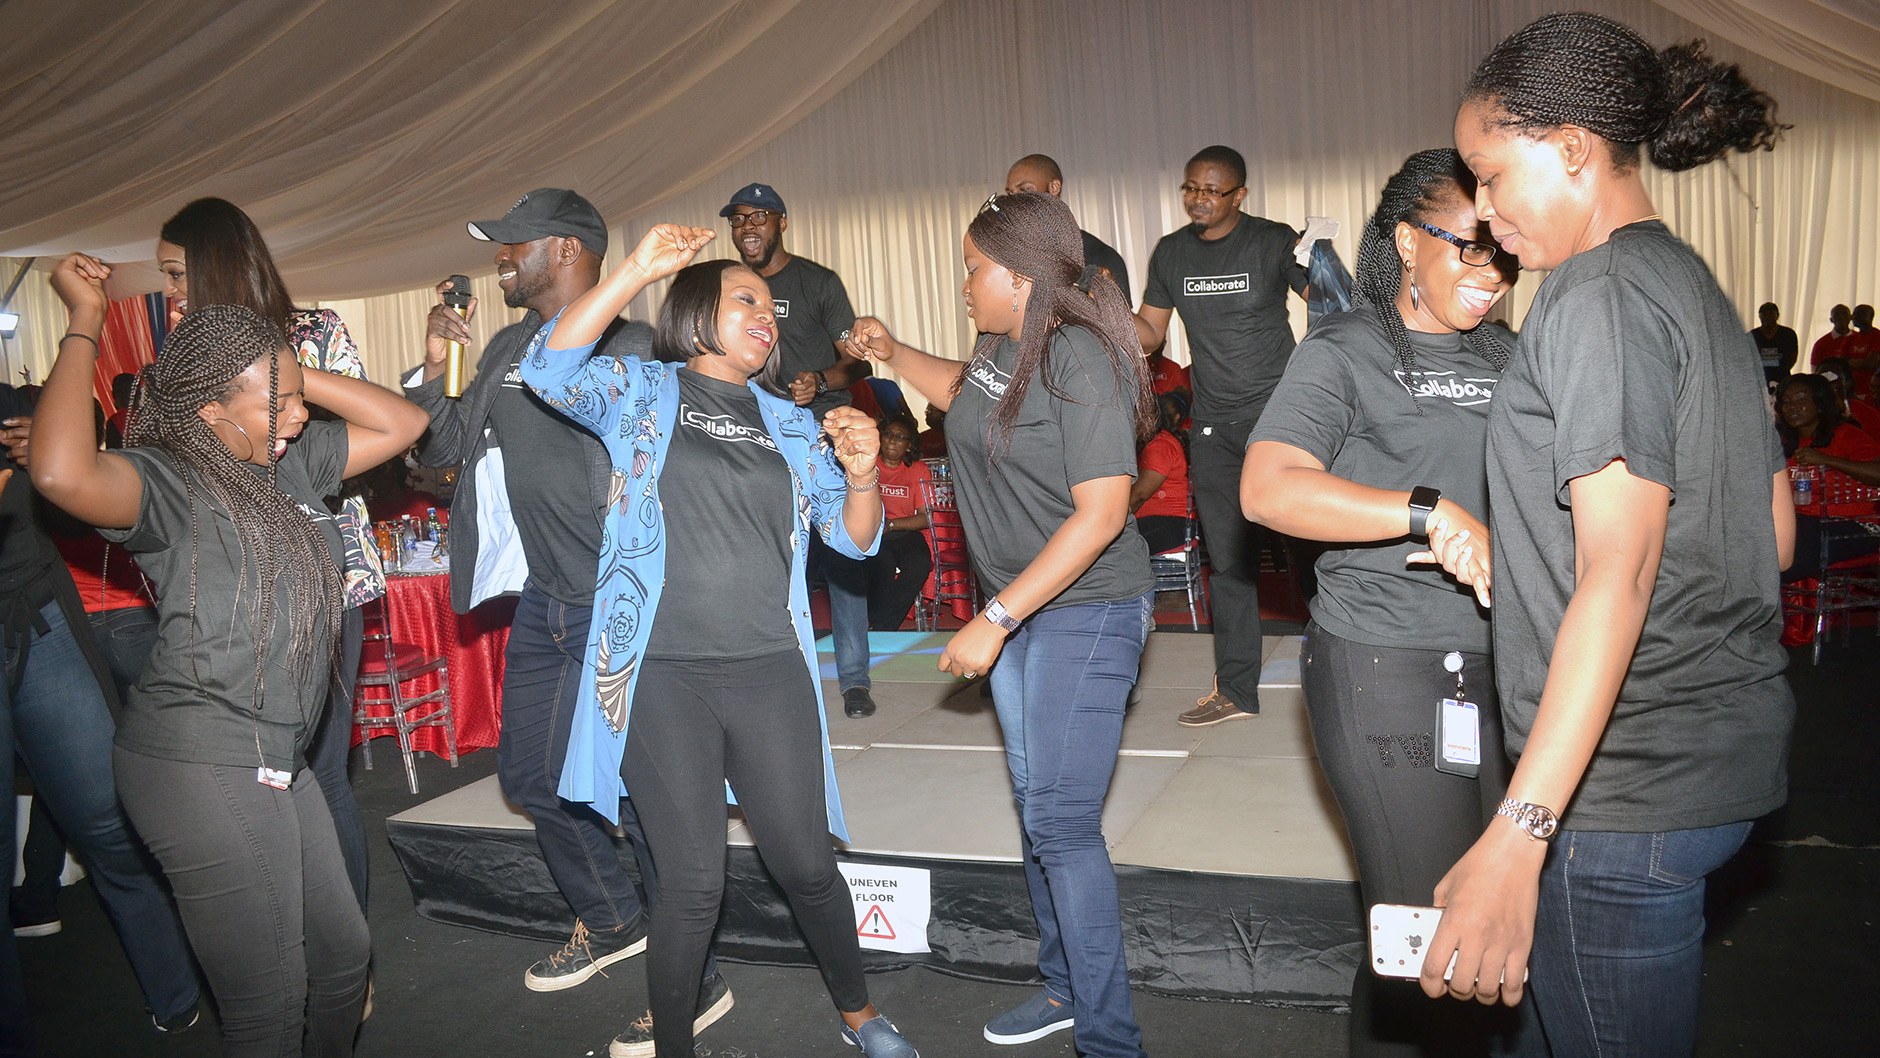 Attendees at the ExxonMobil Upstream keep calm and unwind event in Lagos.